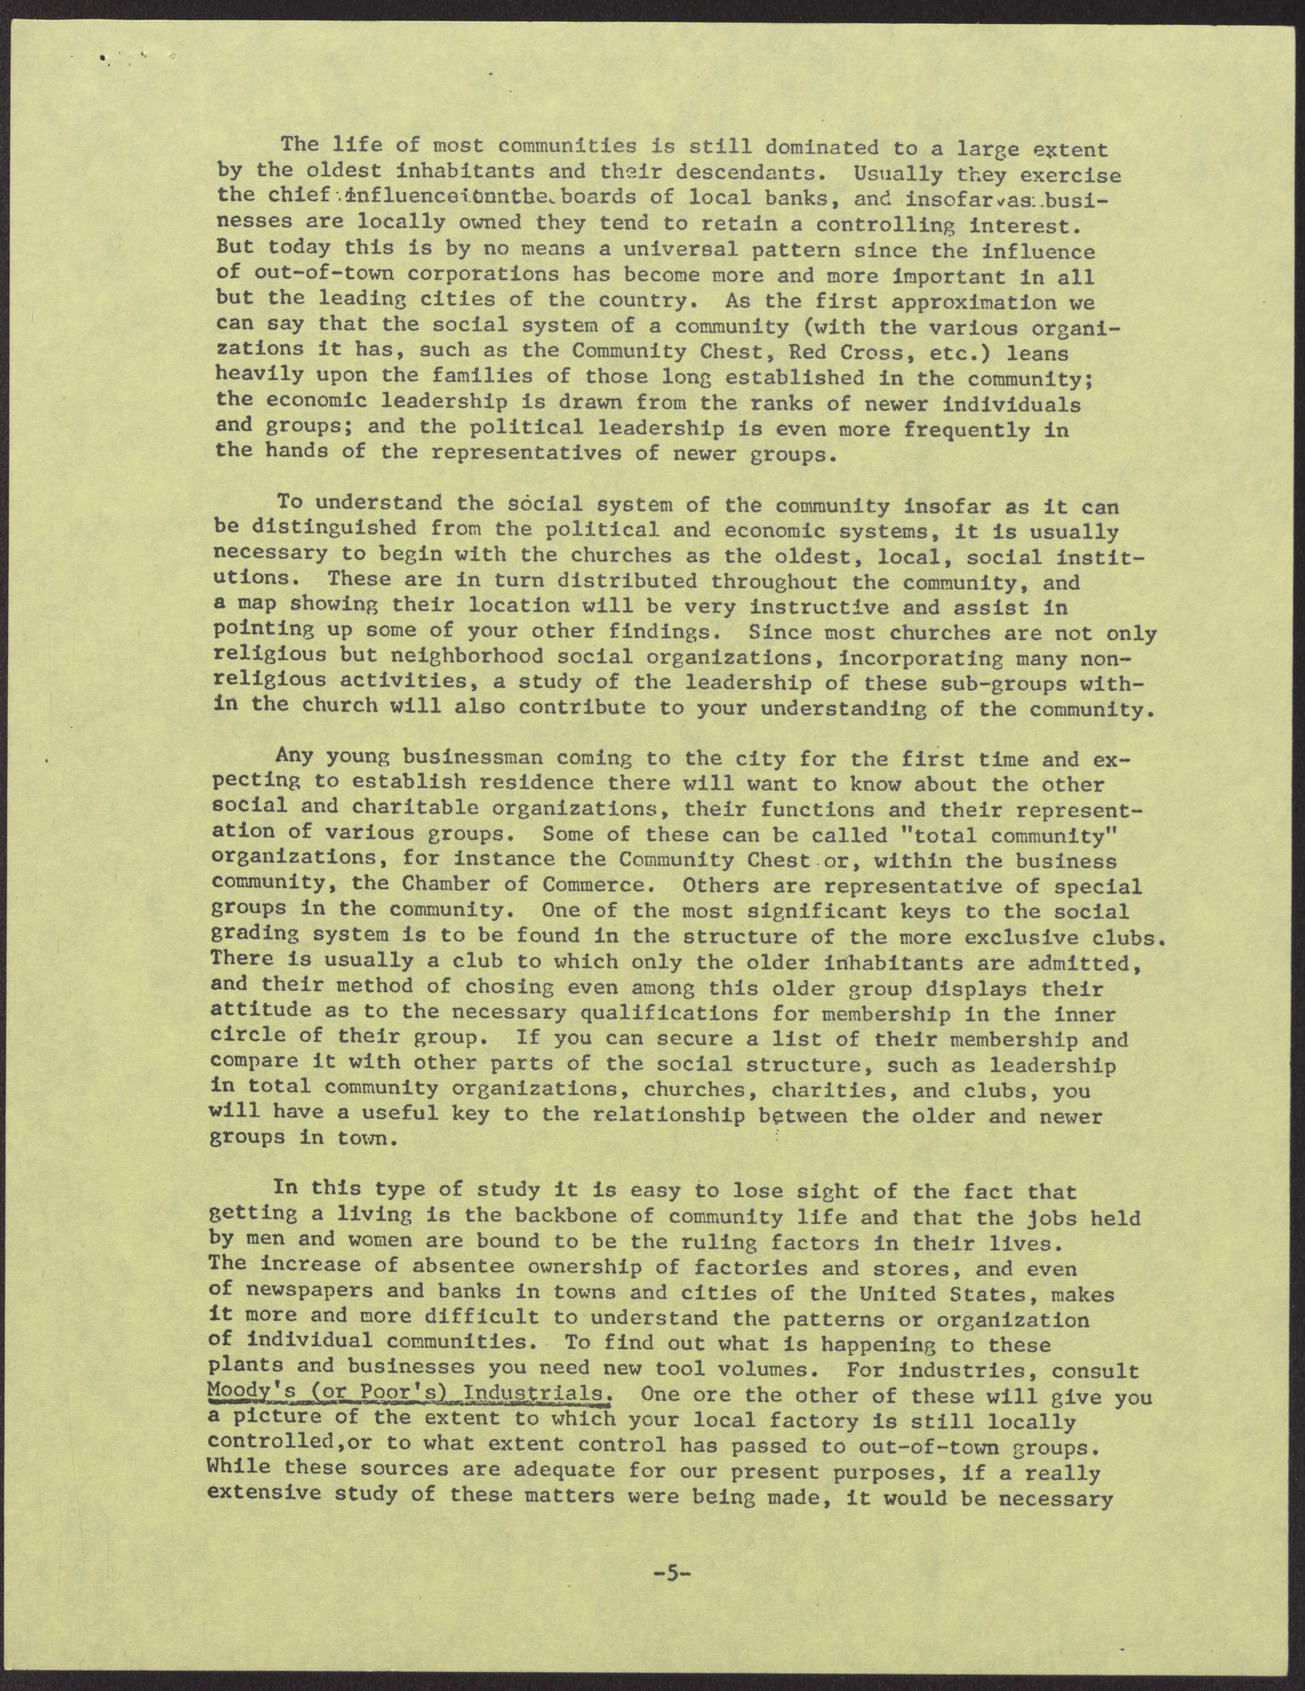 "Suggestions for a Study of Your Hometown," by Robert K. Lamb (7 pages), 1952, page 5